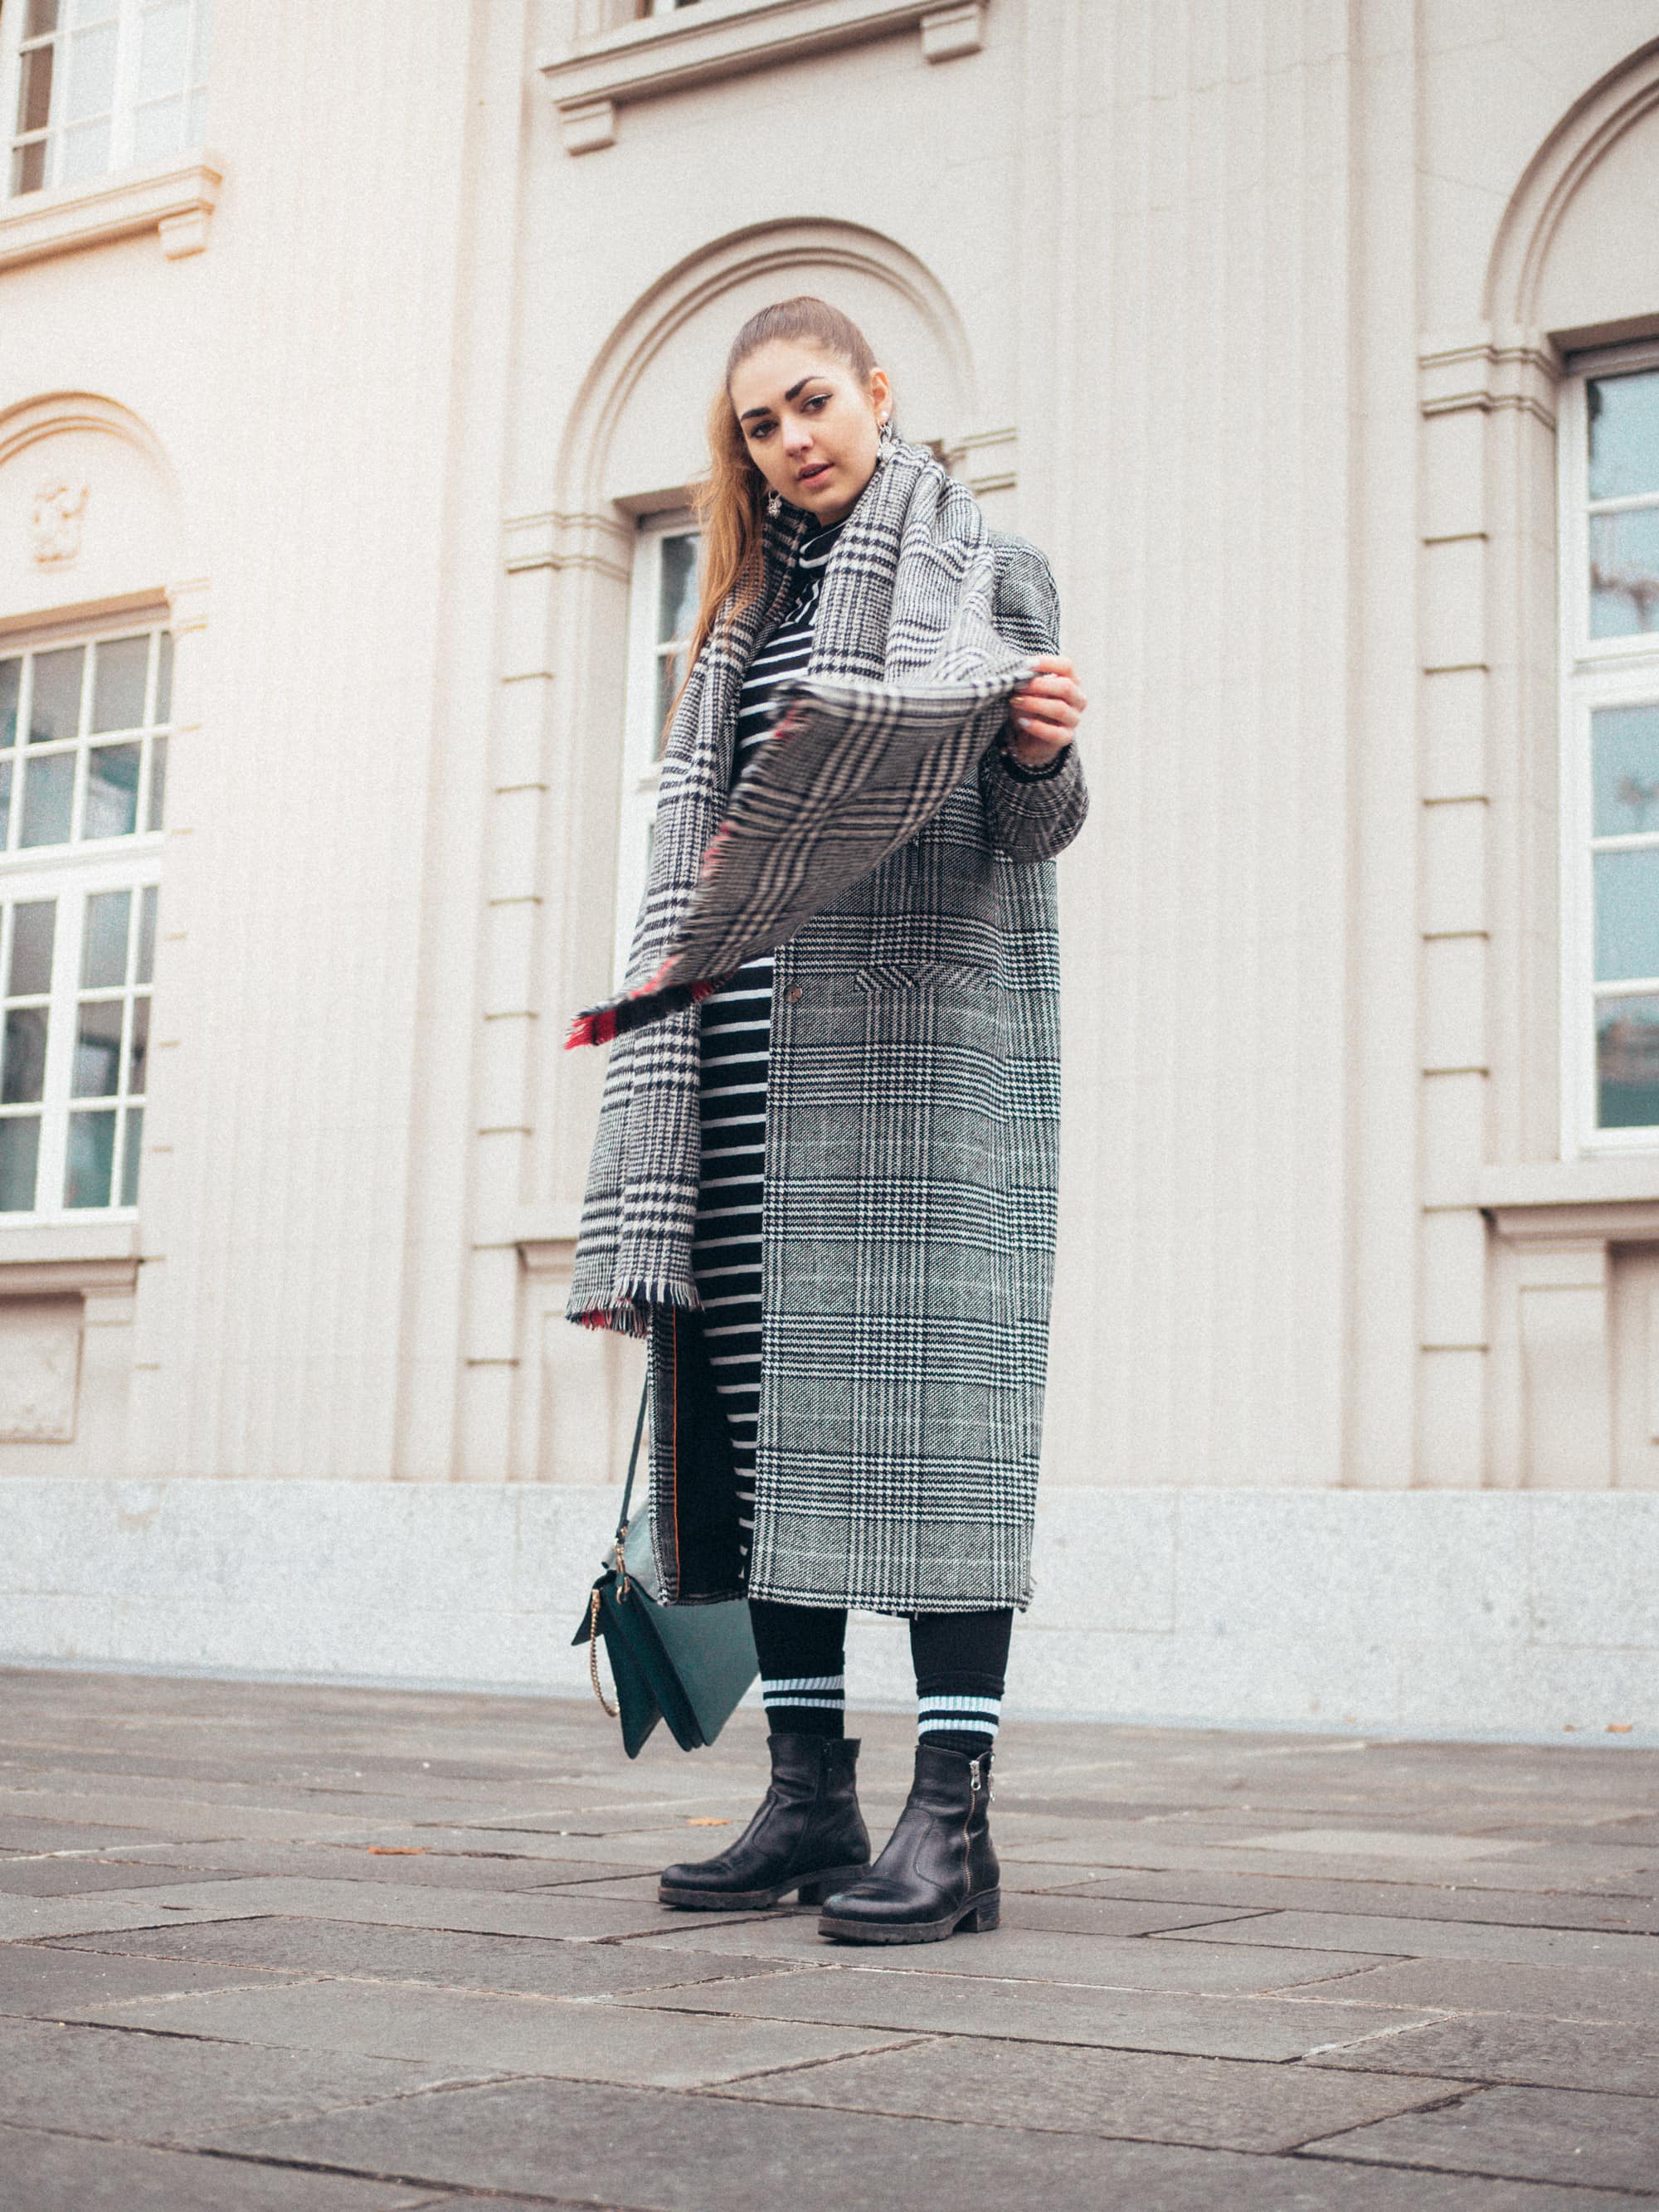 Checked-Coat/Chloé-Bag/Oversized-Coat/Outfit/Fashion/Outfitpost/Outfit-Photo/Ankle-Boots